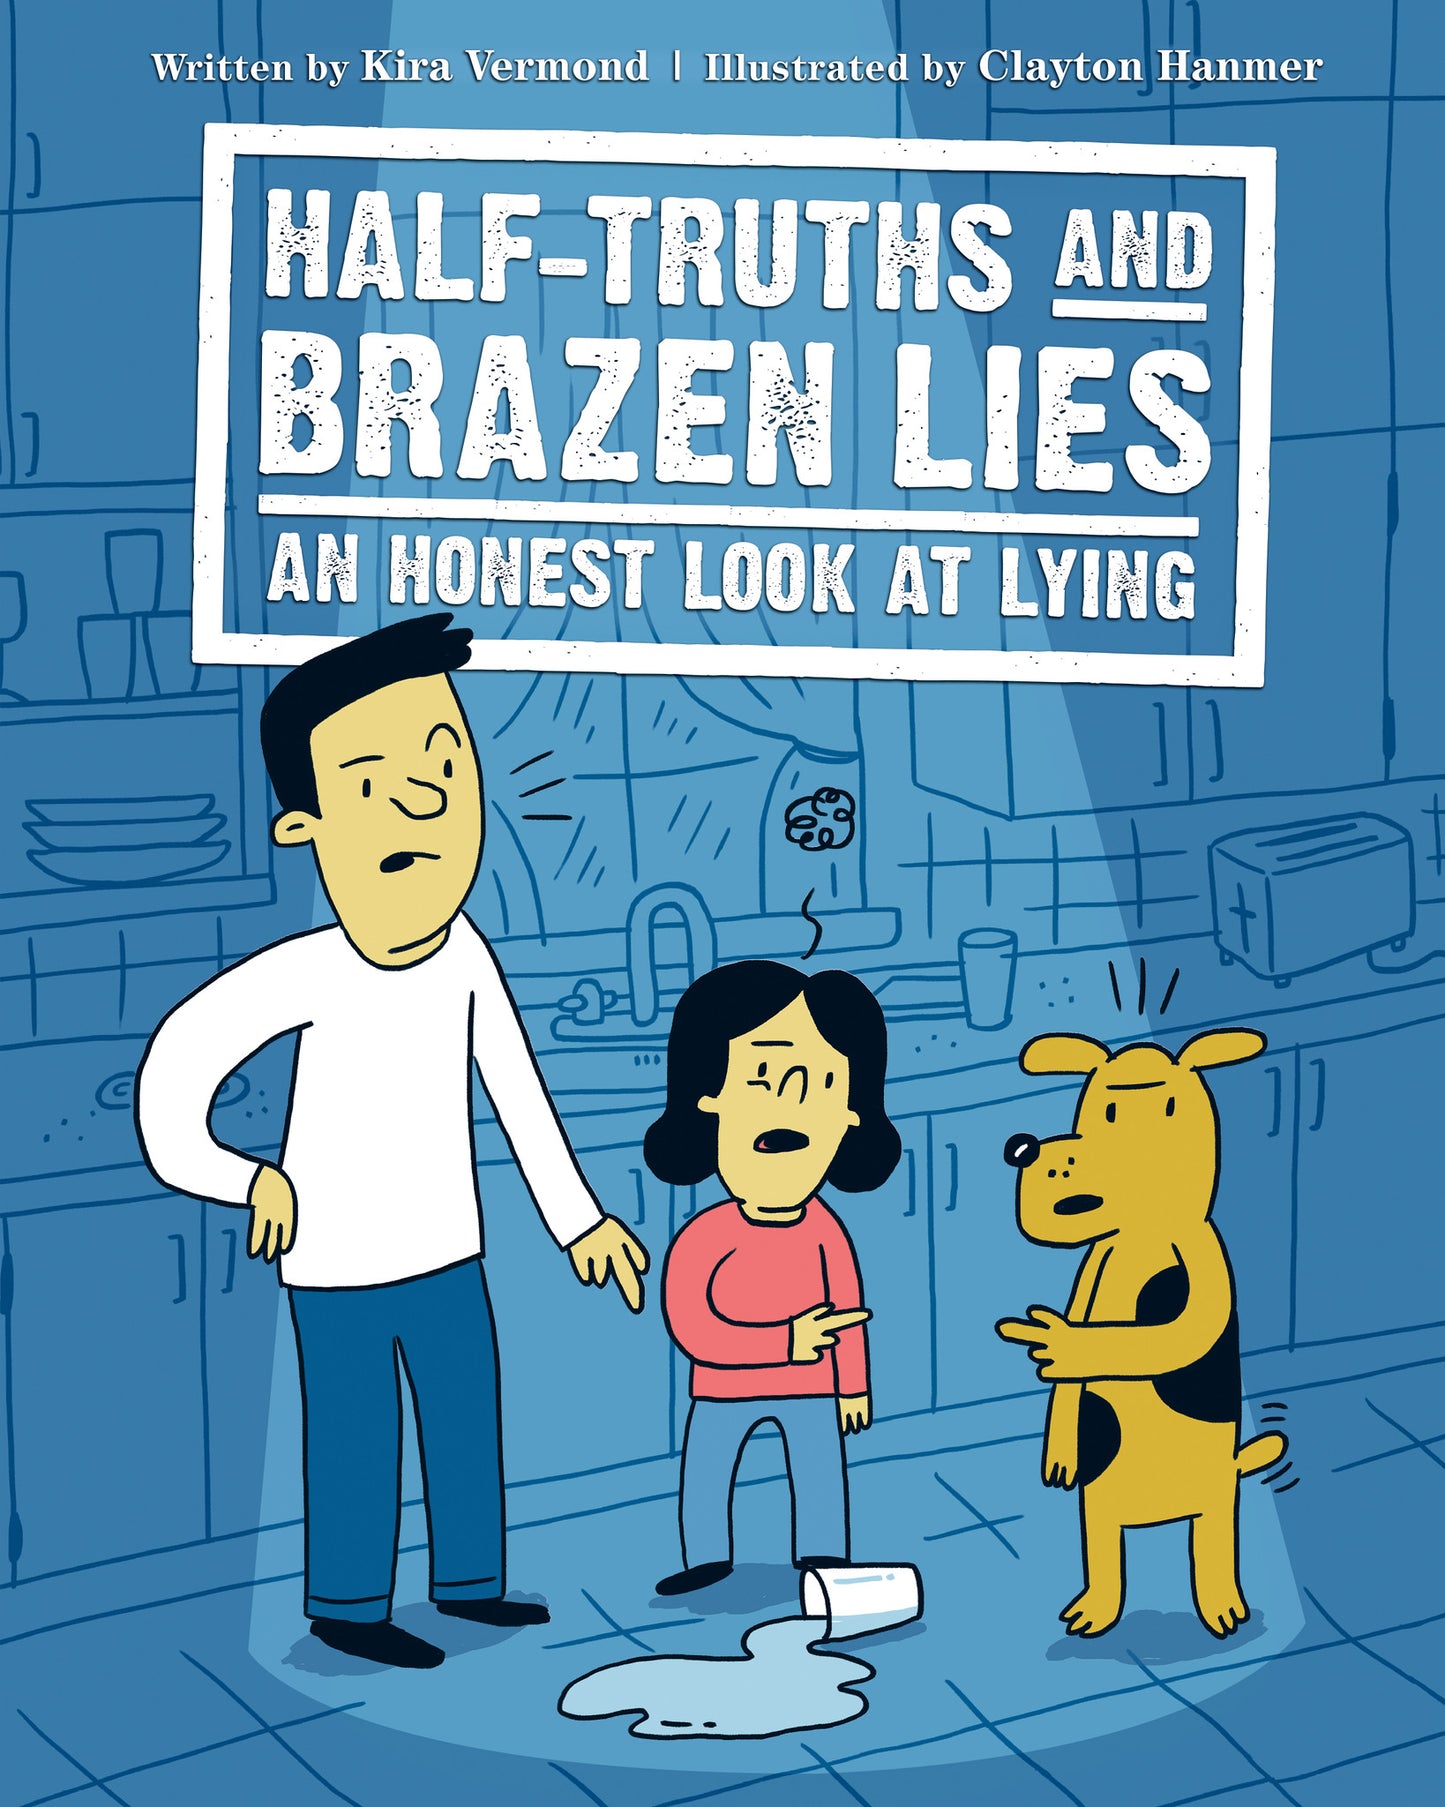 Half-Truths and Brazen Lies - Owlkids - Reading for kids and literacy resources for parents made fun. Books helping kids to learn.